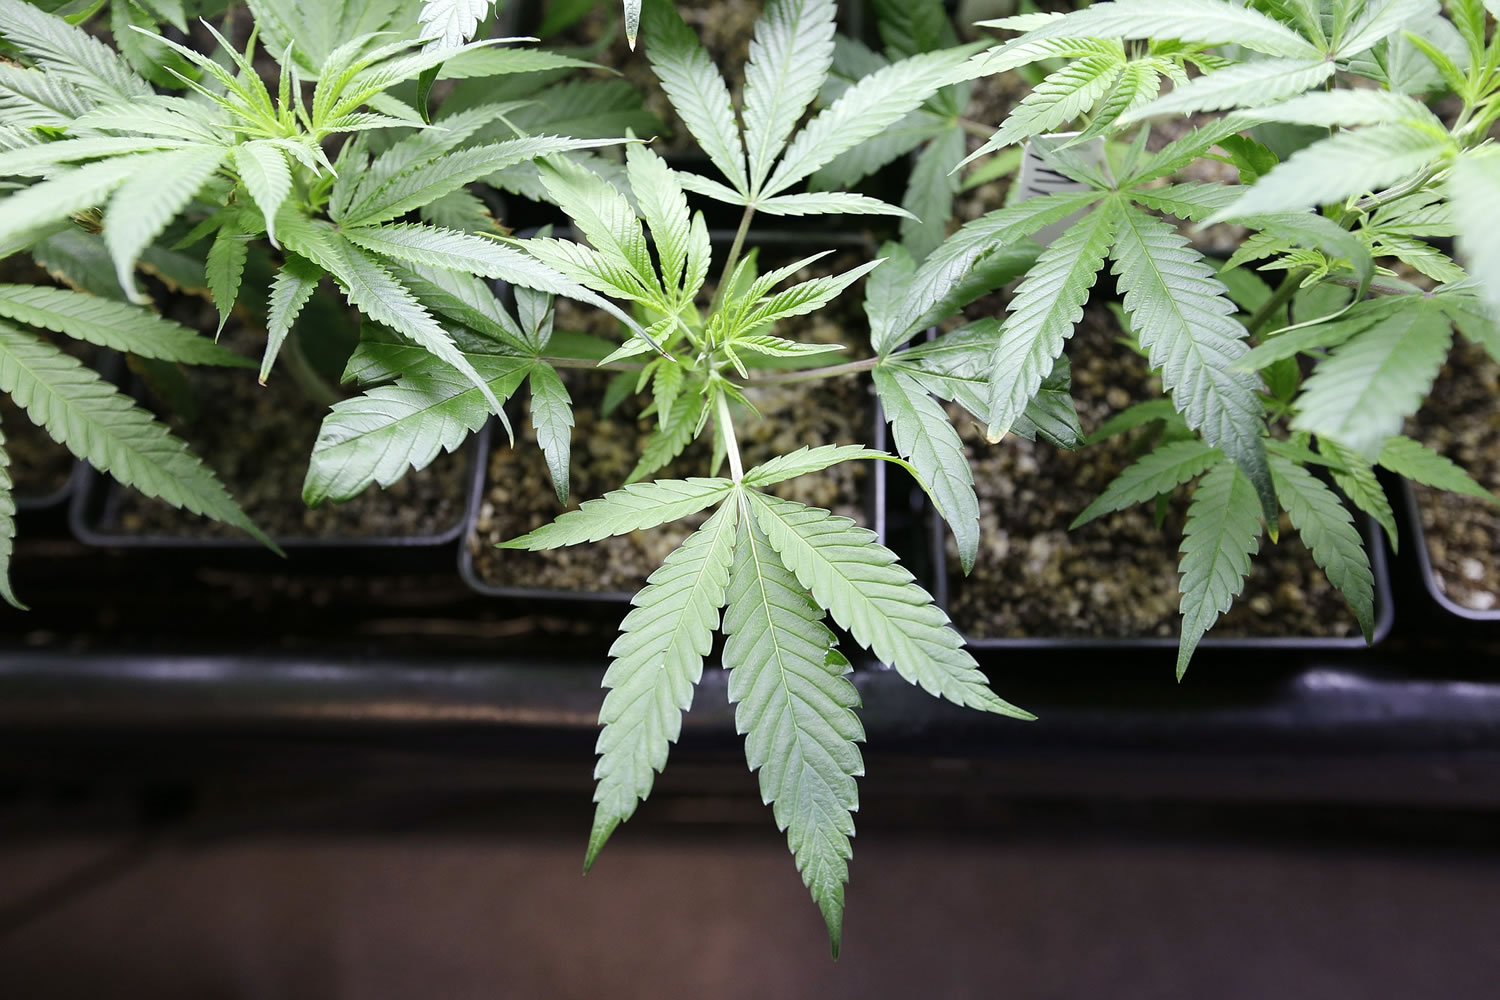 Marijuana plant starts are seen in early April 2014 at a growing facility in Seattle.